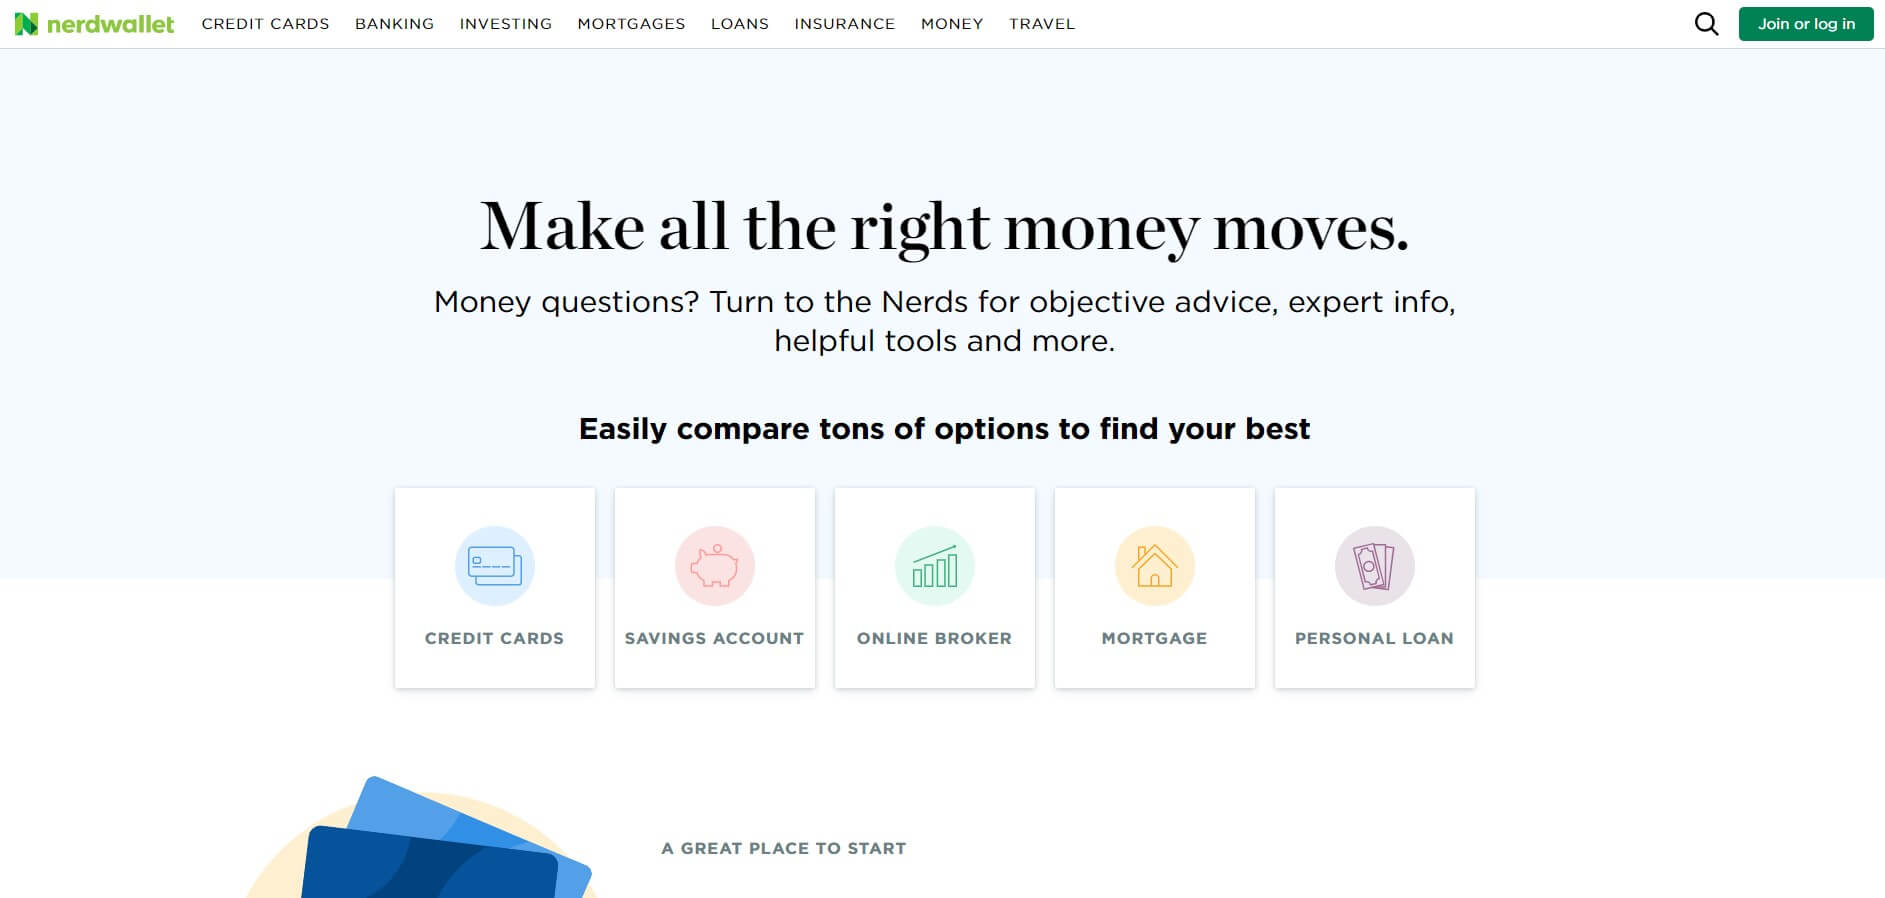 Financial products: NerdWallet